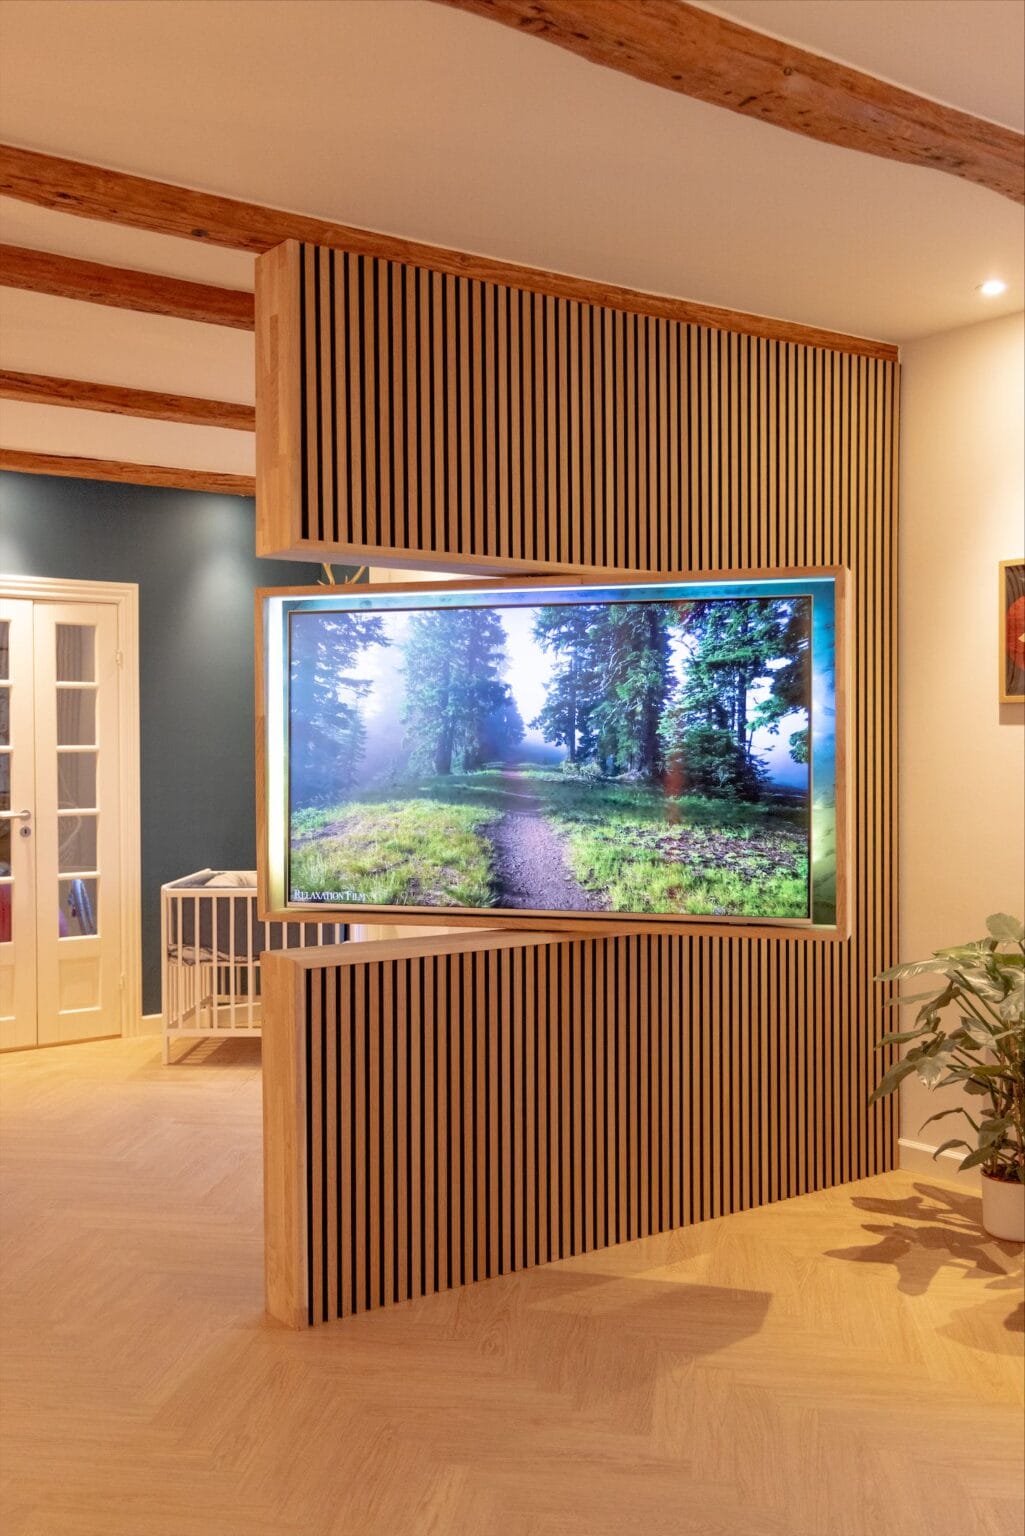 Modern interior with large forest scene on screen.